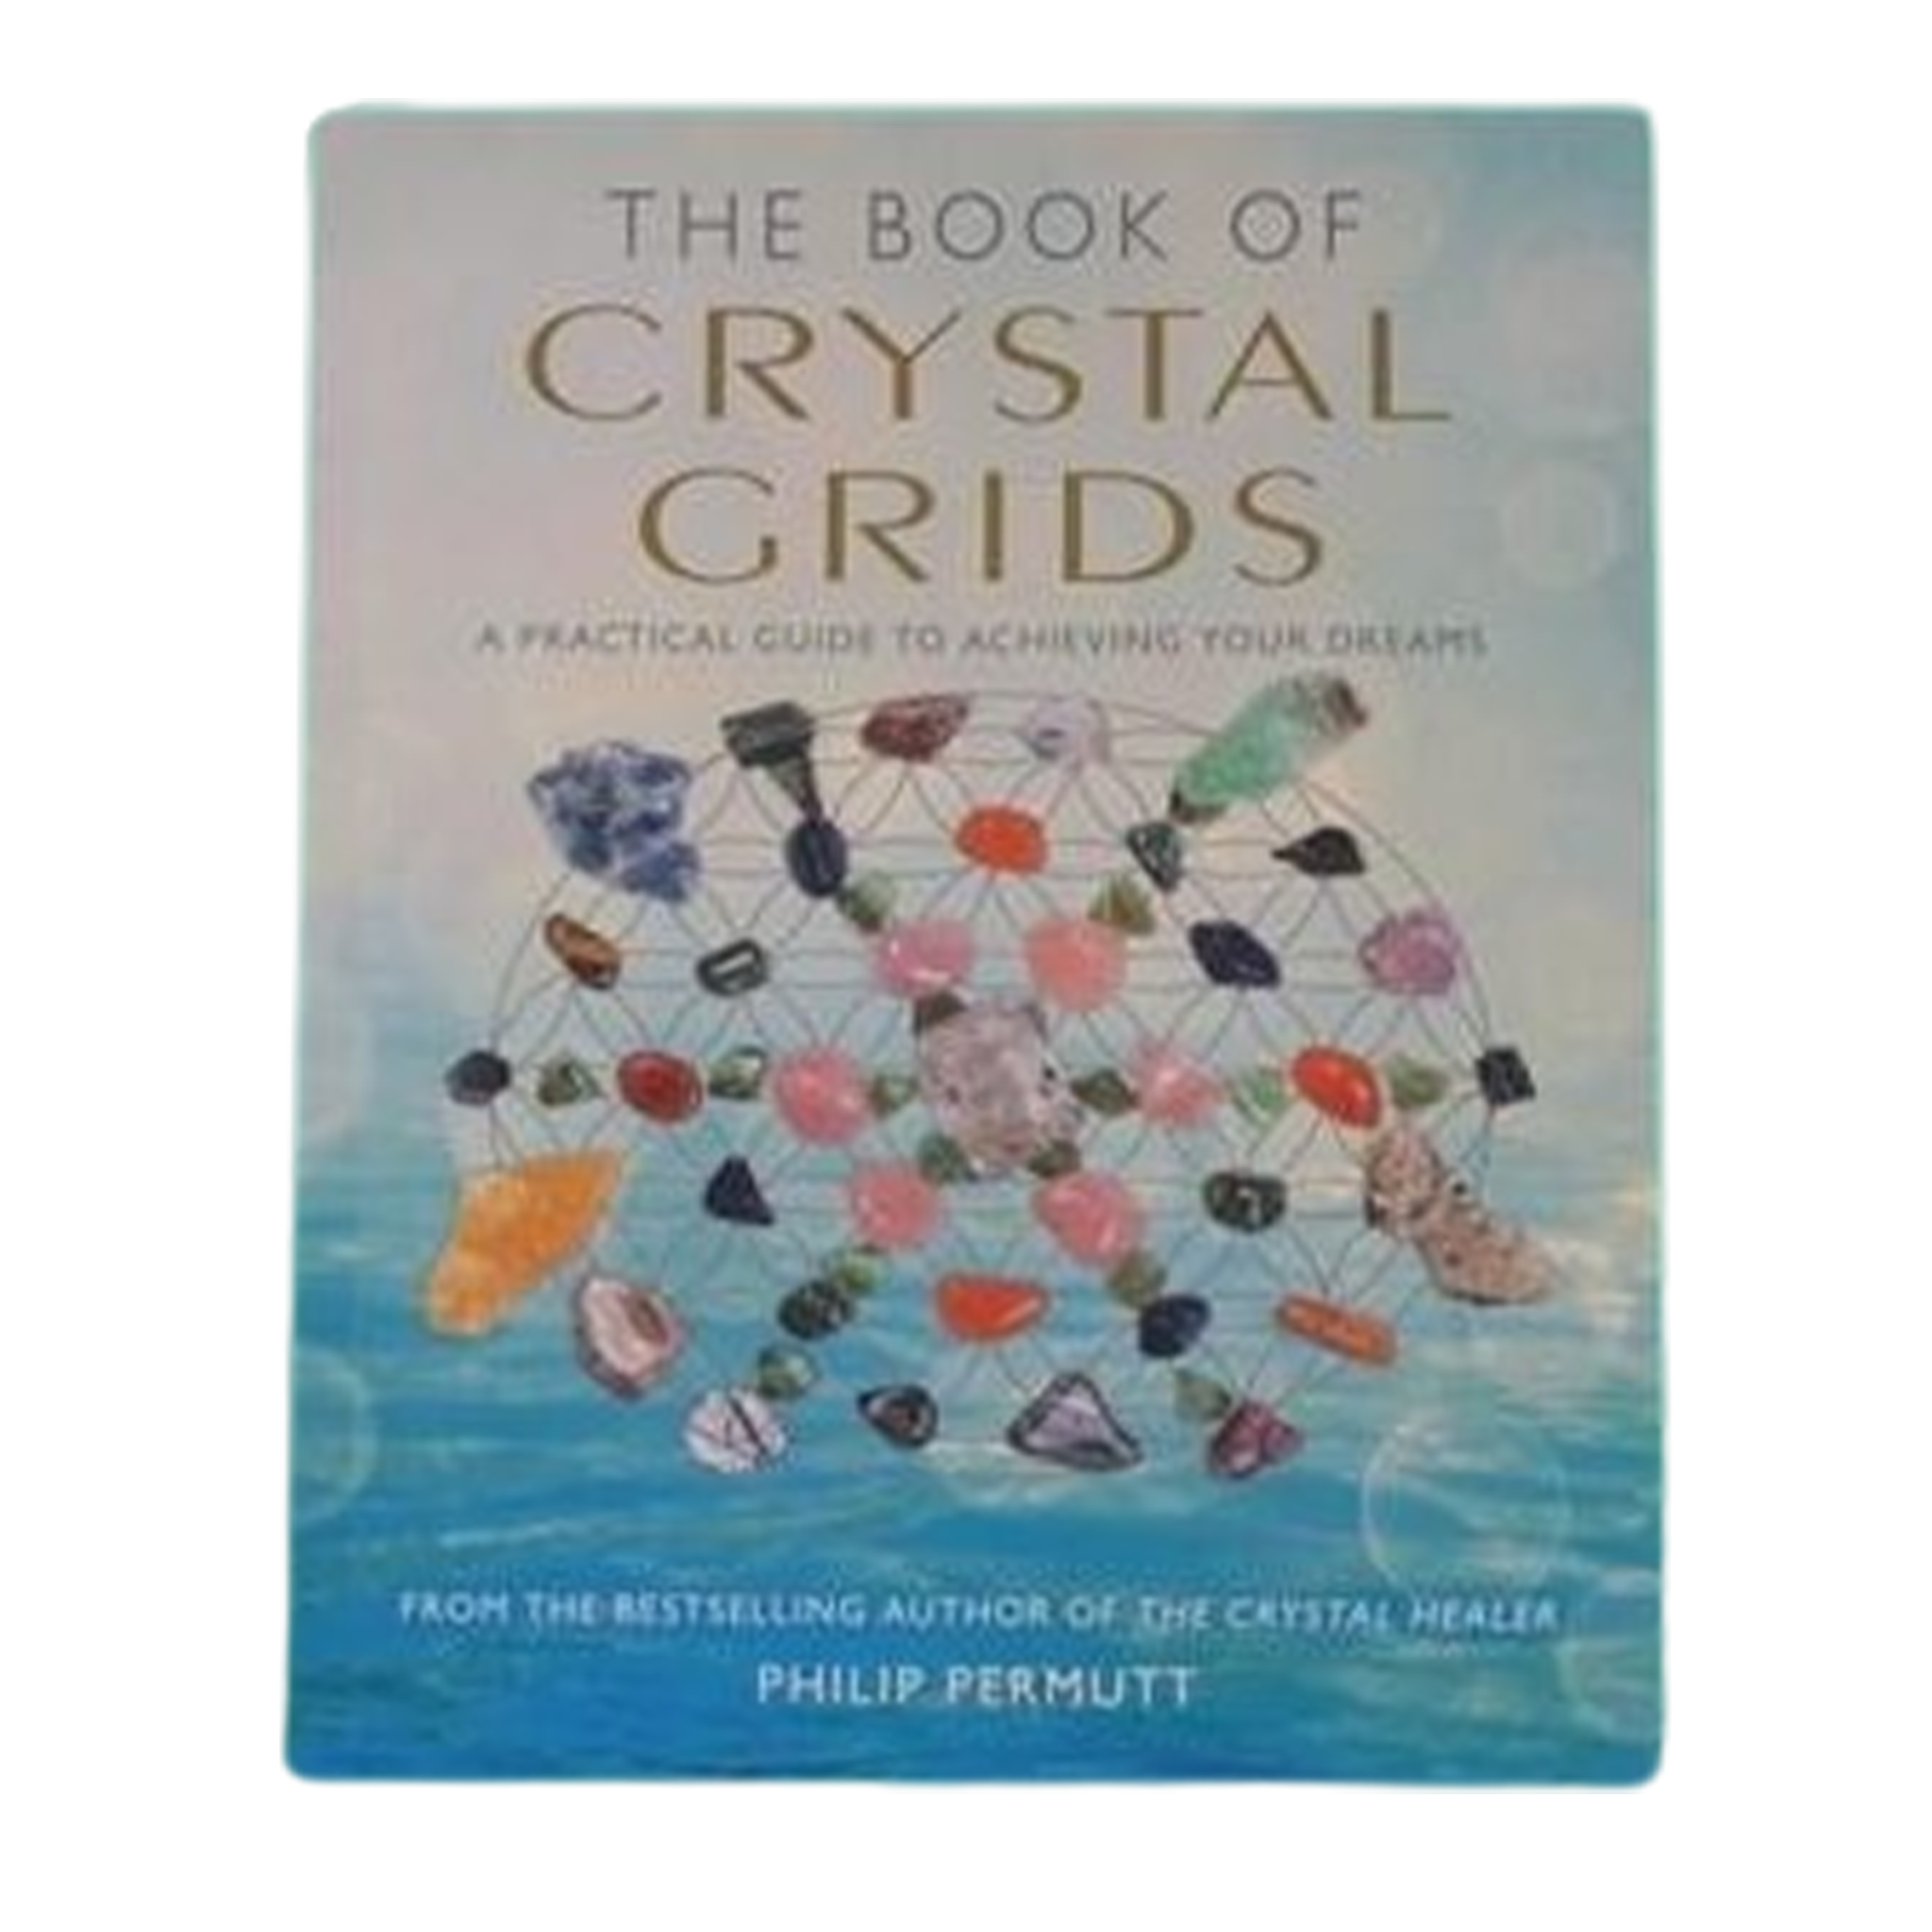 The Book of Crystal Grids  by Philip Permutt